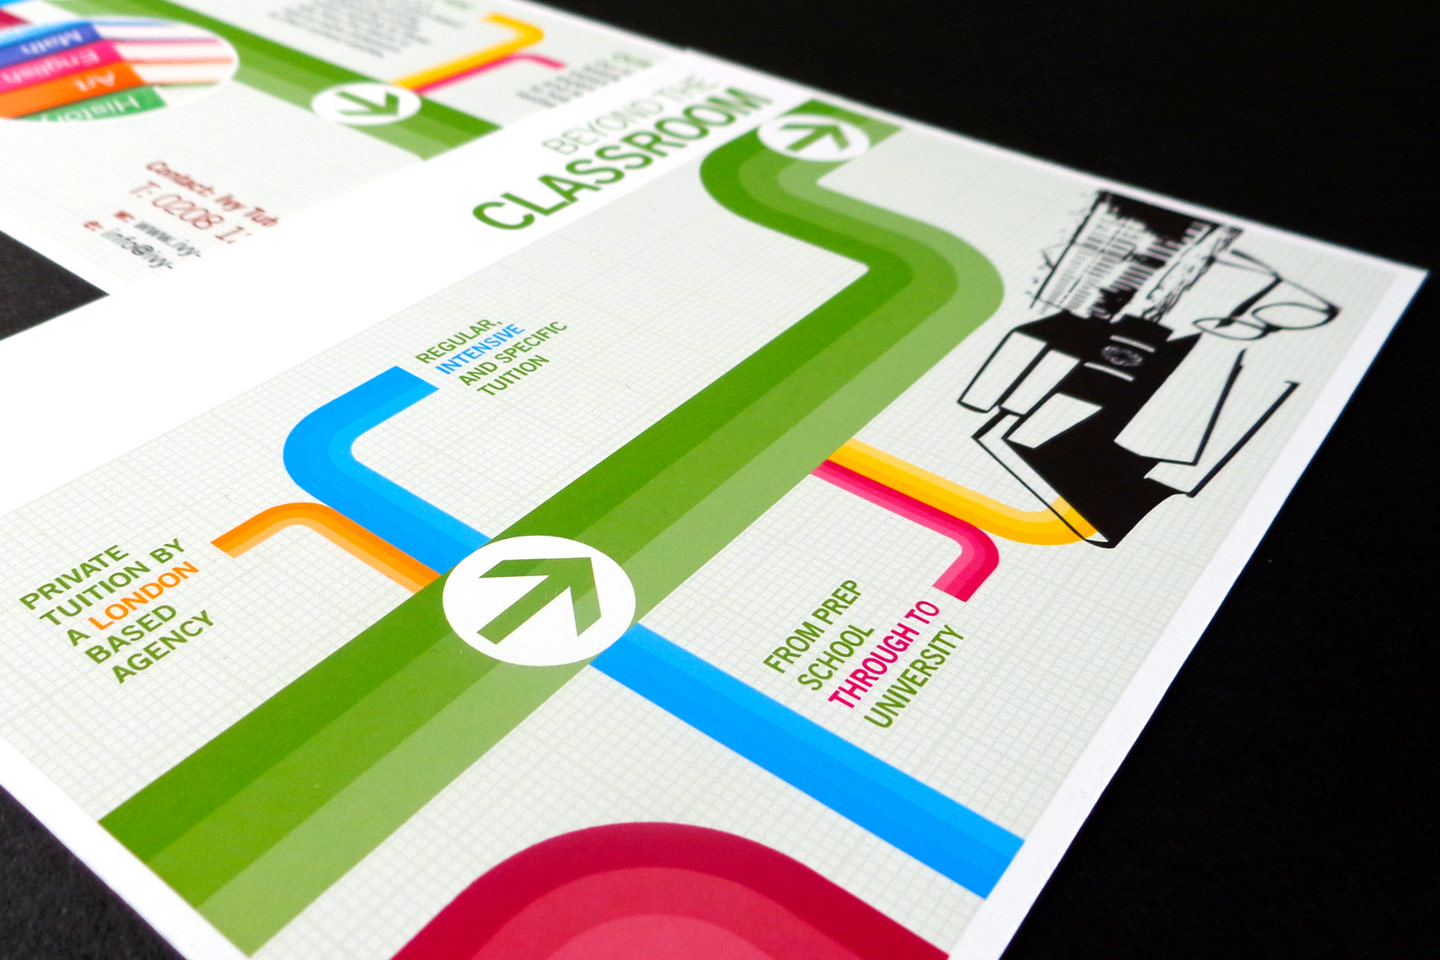 Company literature and stationery design